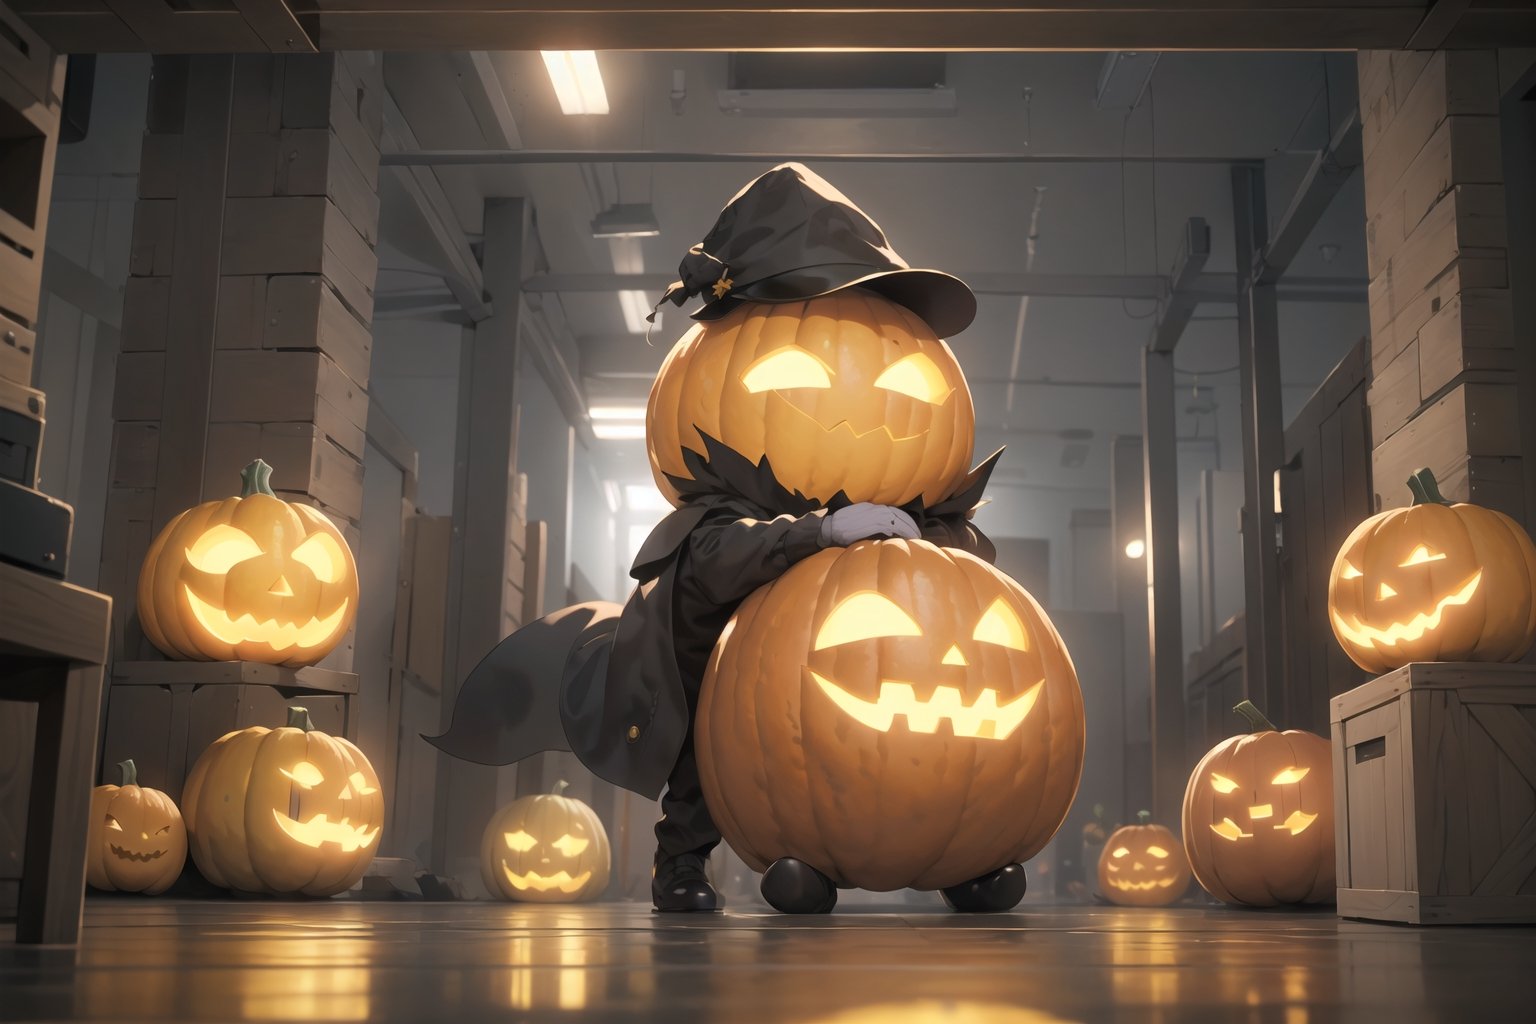 1pumpkin monter, gigantic punmpkin monsetr,  at dark night office room, wearing a holy cap, brilliant cap, Copy machine that glows eerily, fusion of copy machine and pumpkin monster,  